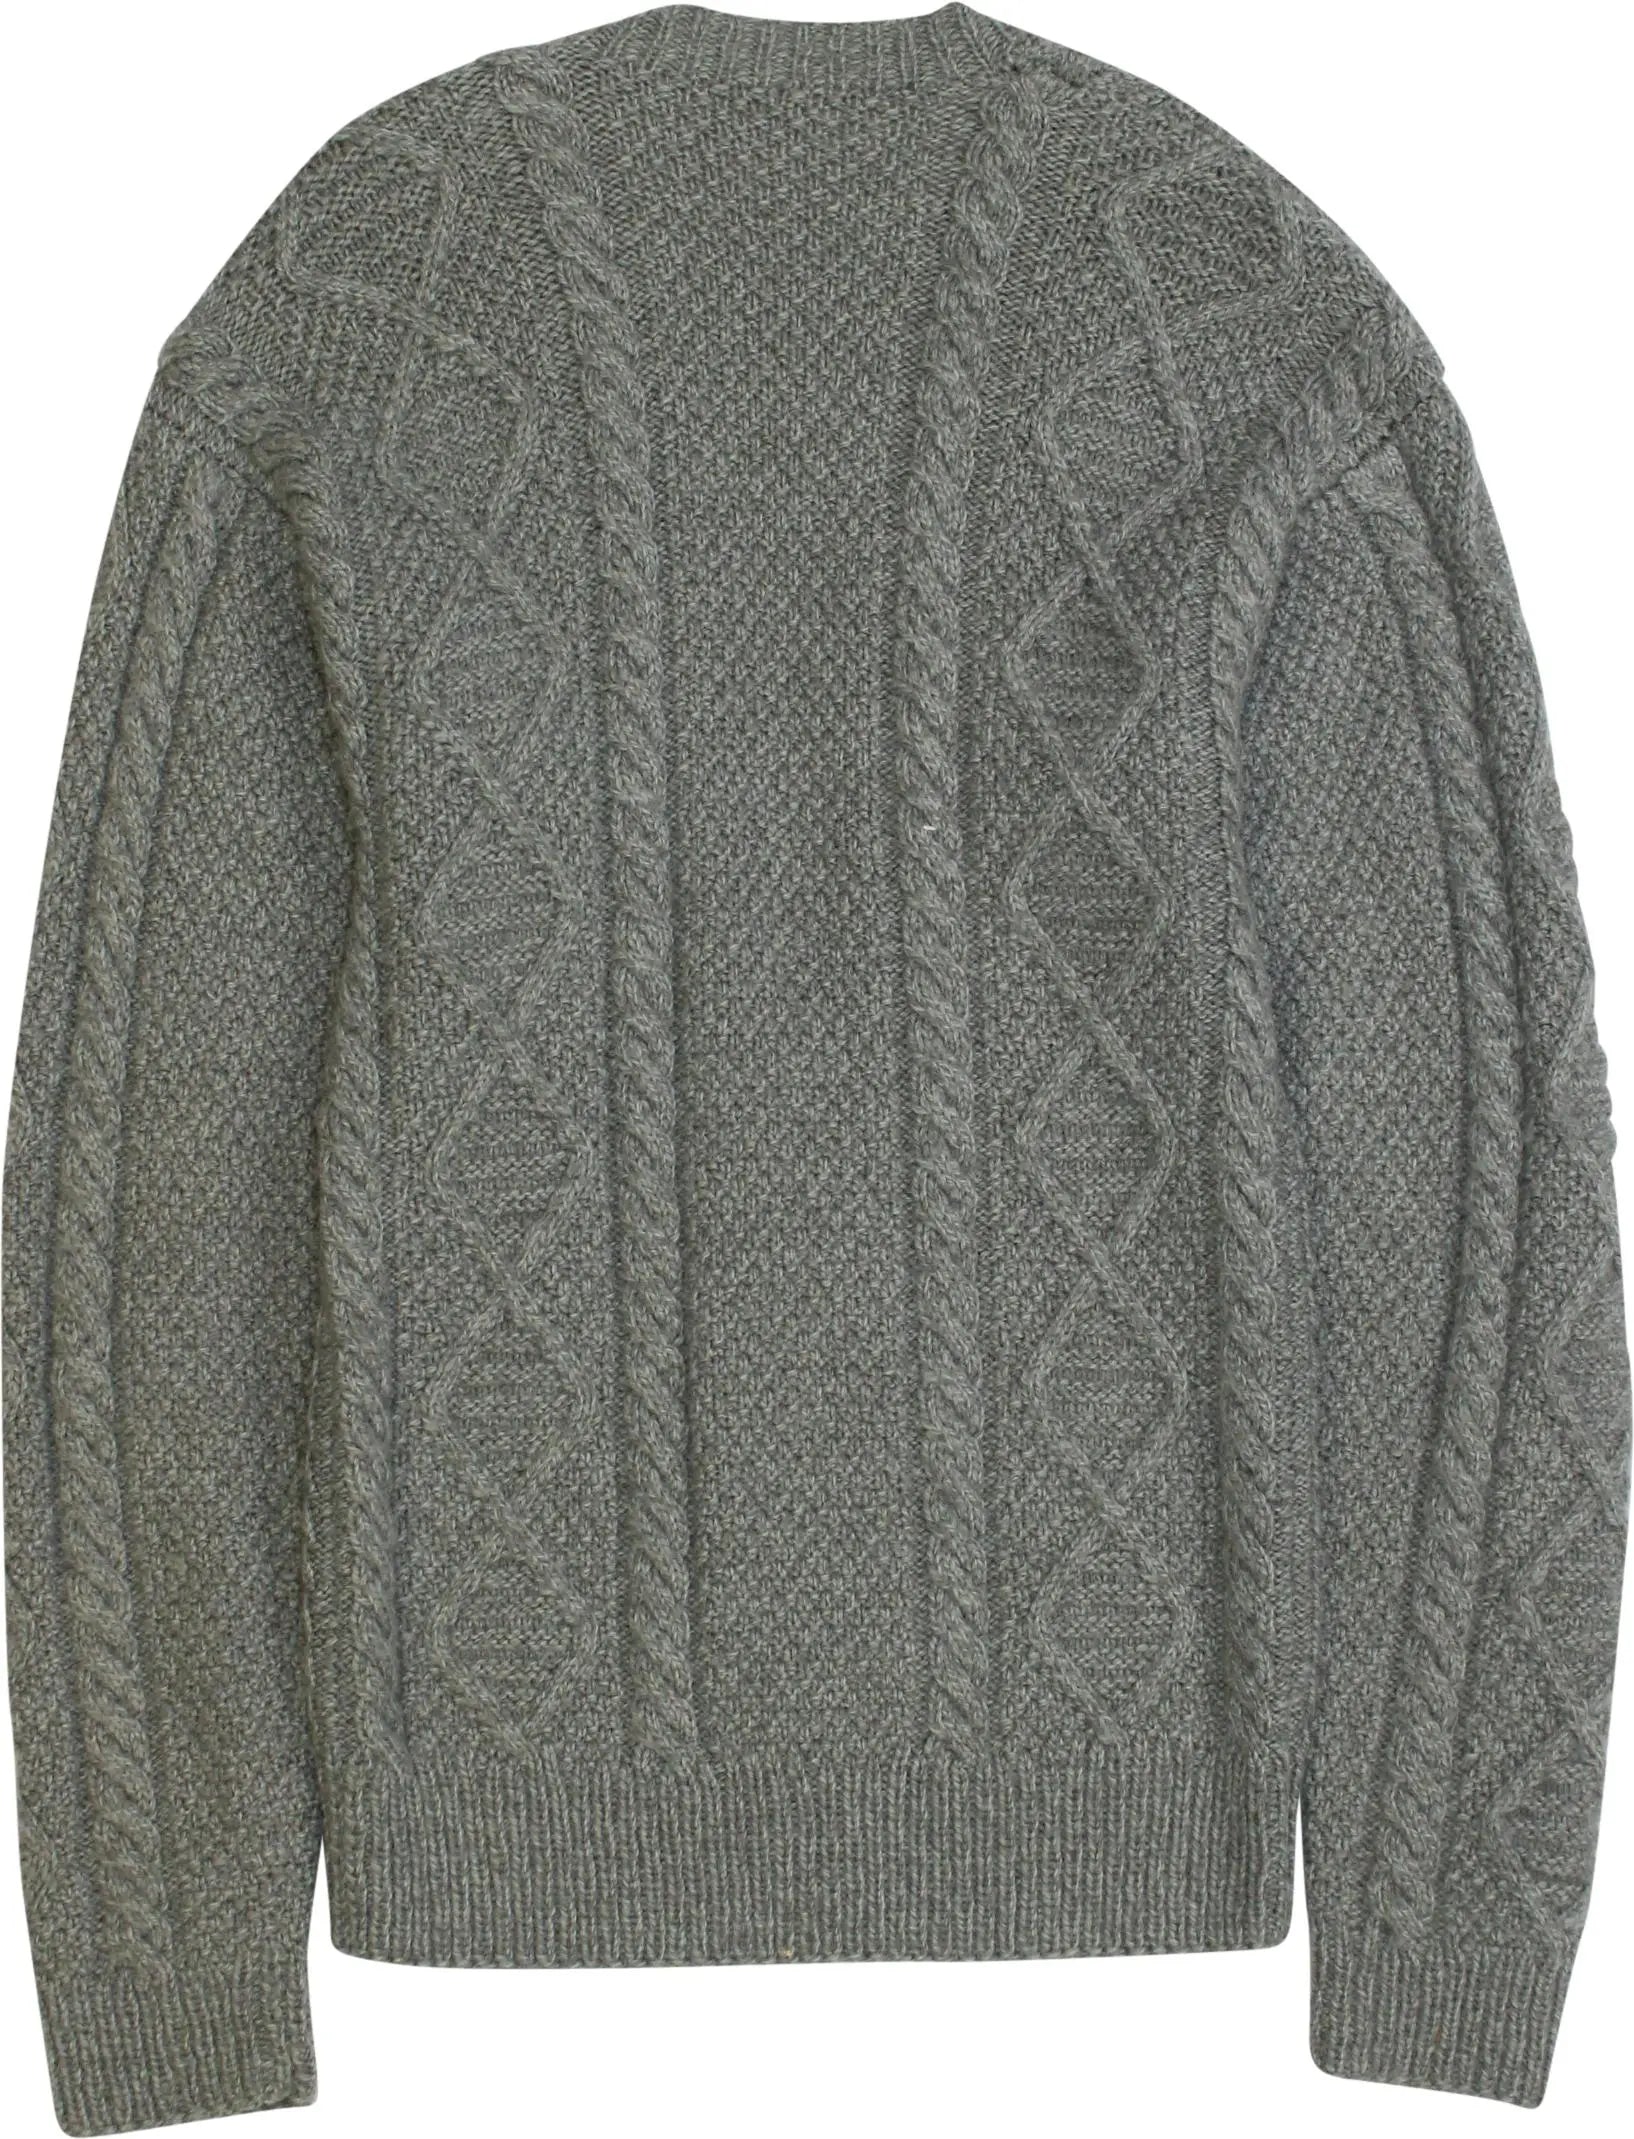 Handmade - Hand Knitted Cardigan- ThriftTale.com - Vintage and second handclothing